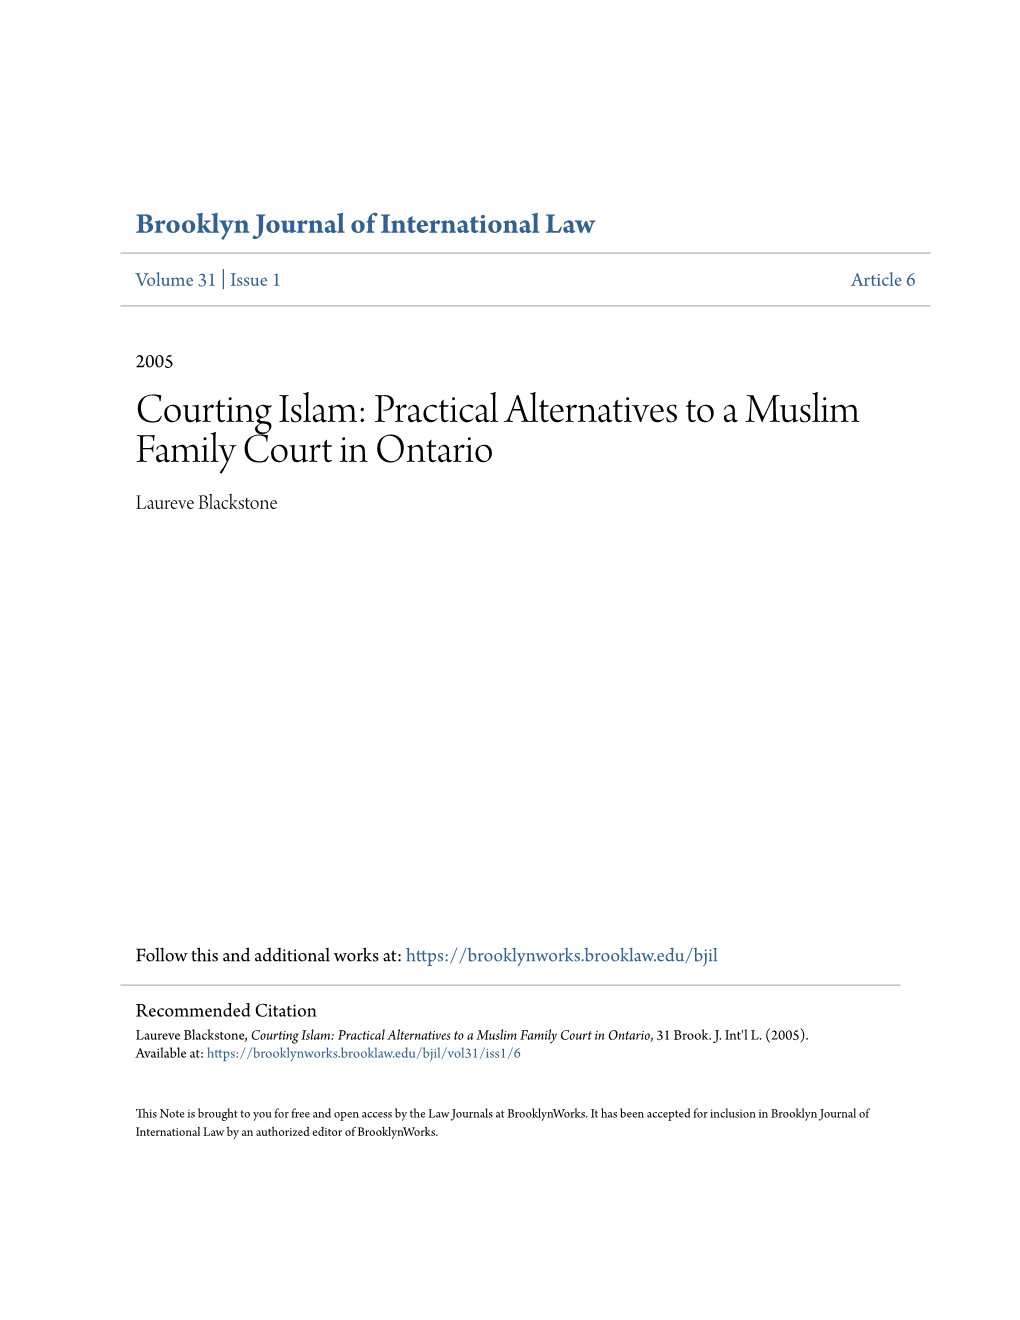 Courting Islam: Practical Alternatives to a Muslim Family Court in Ontario Laureve Blackstone